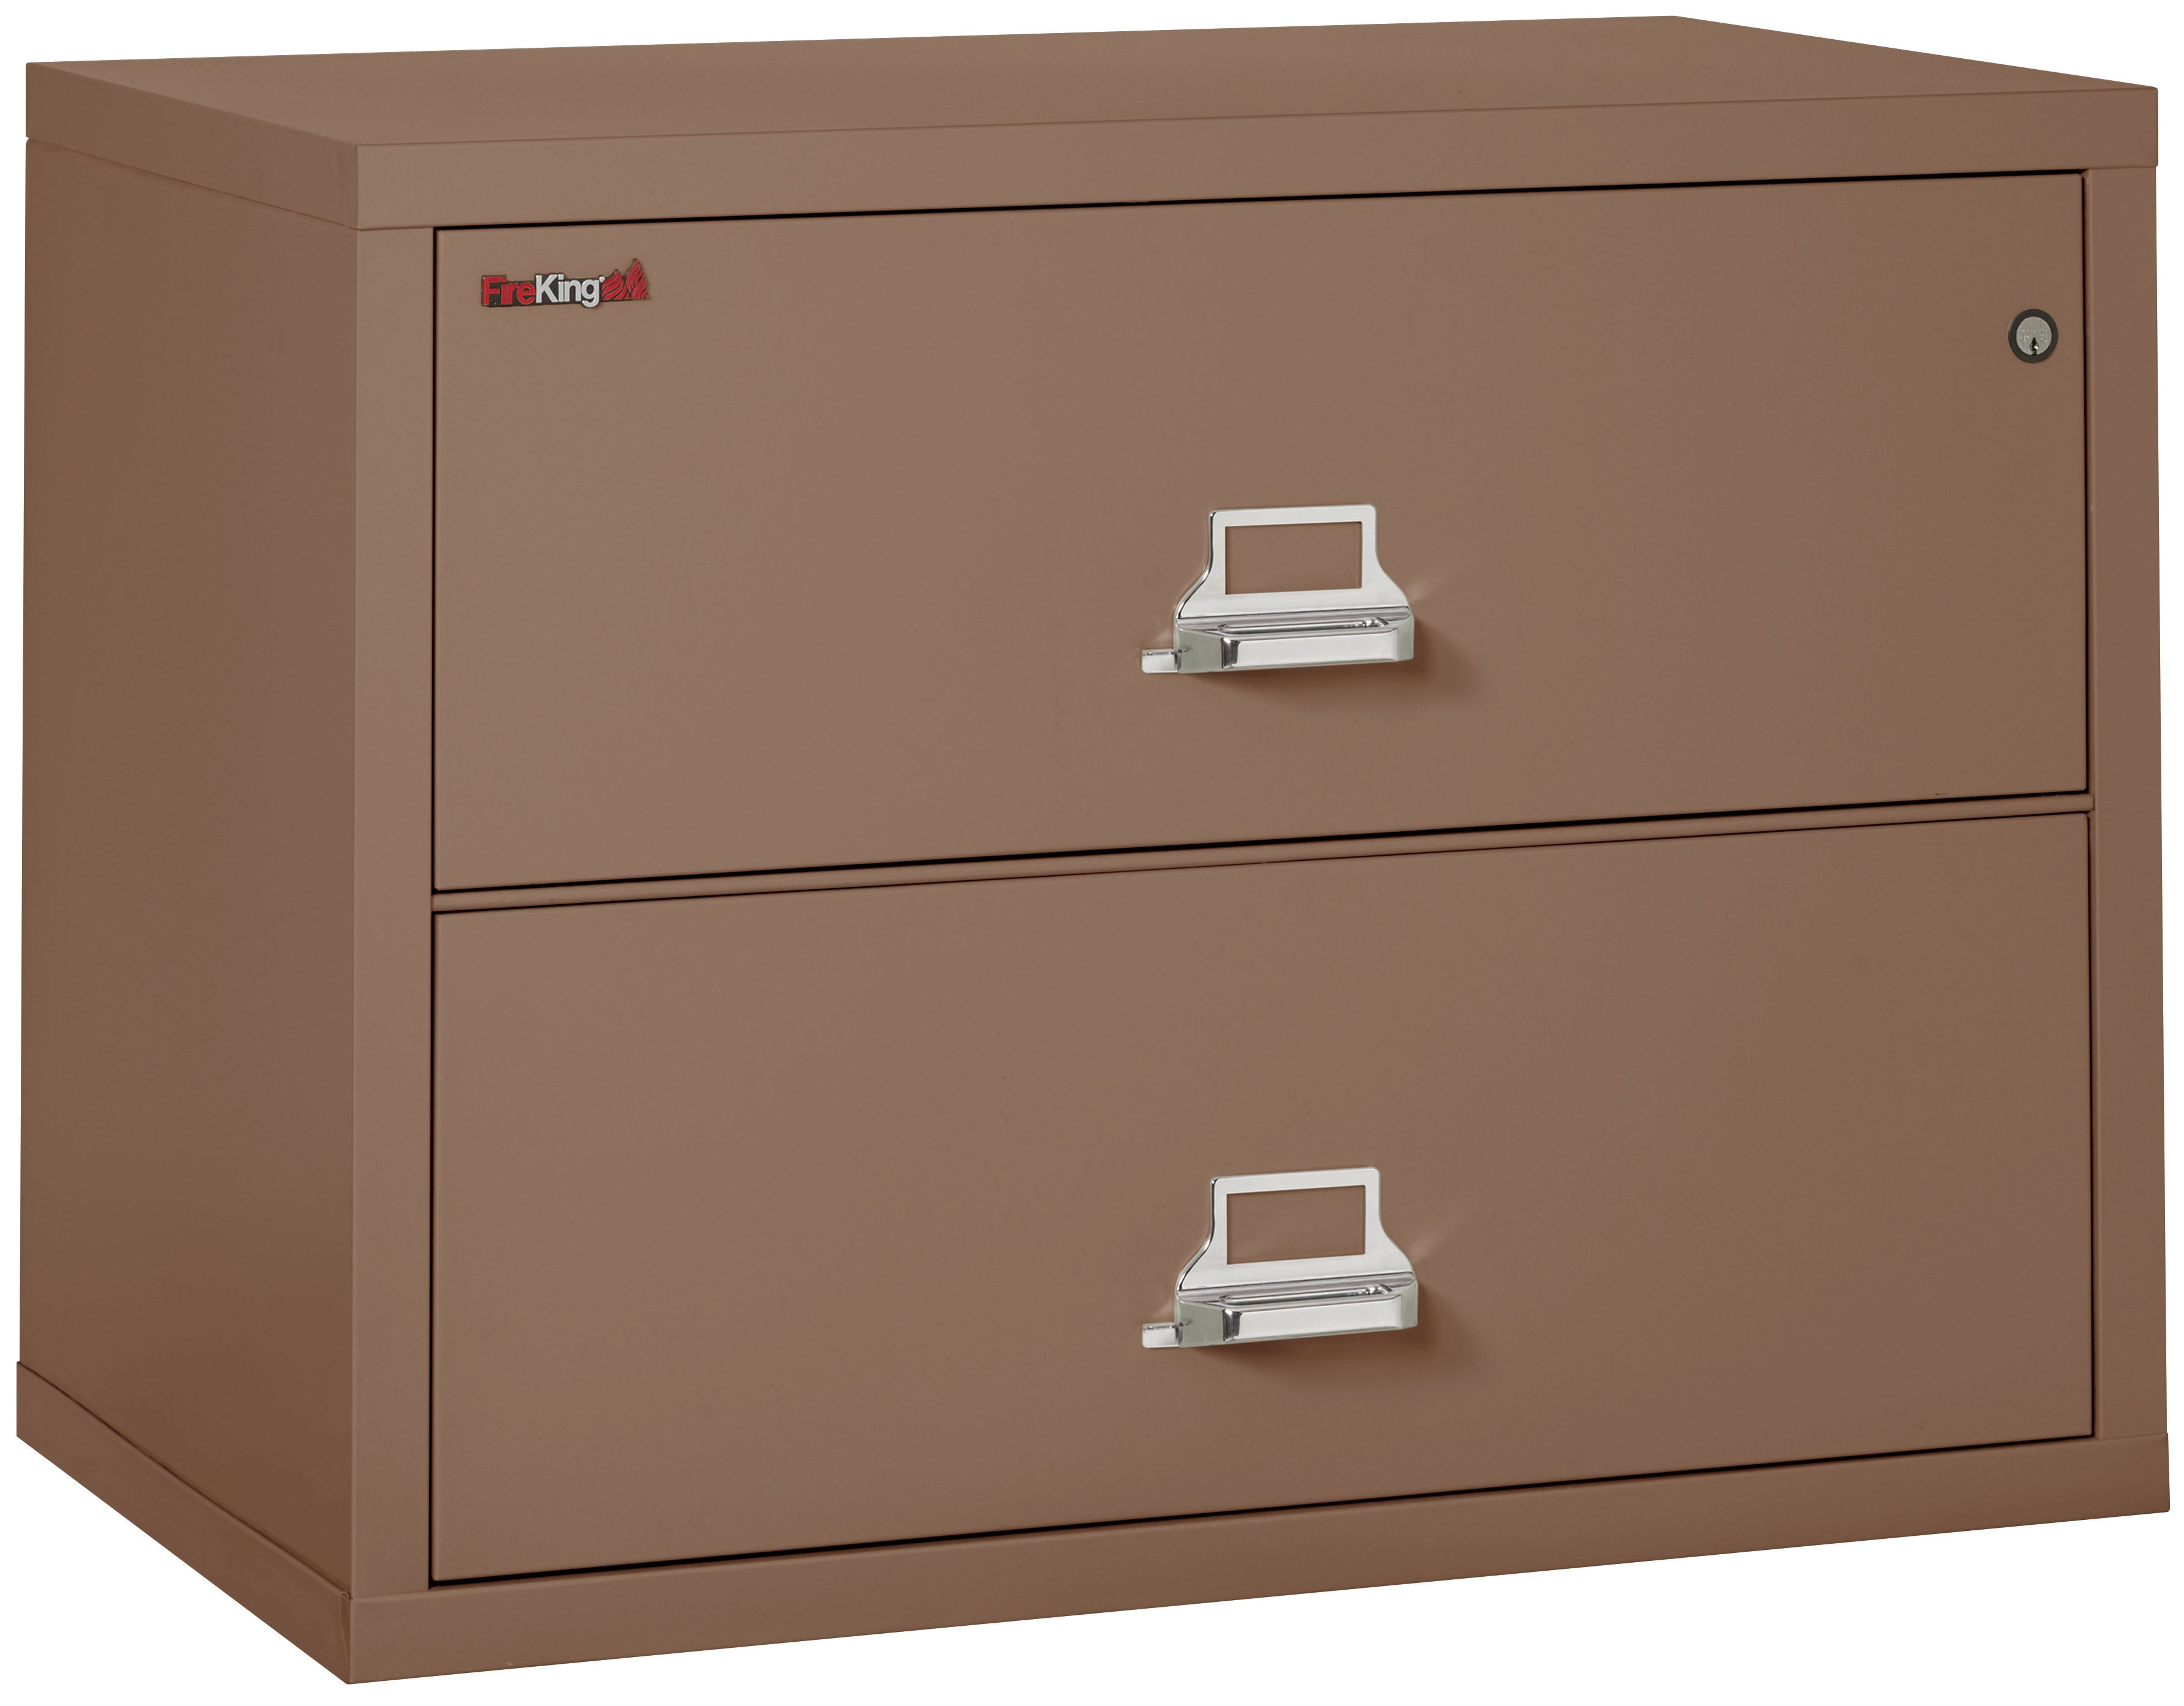 Fire Resistant File Cabinet - 2 Drawer Lateral 38" wide